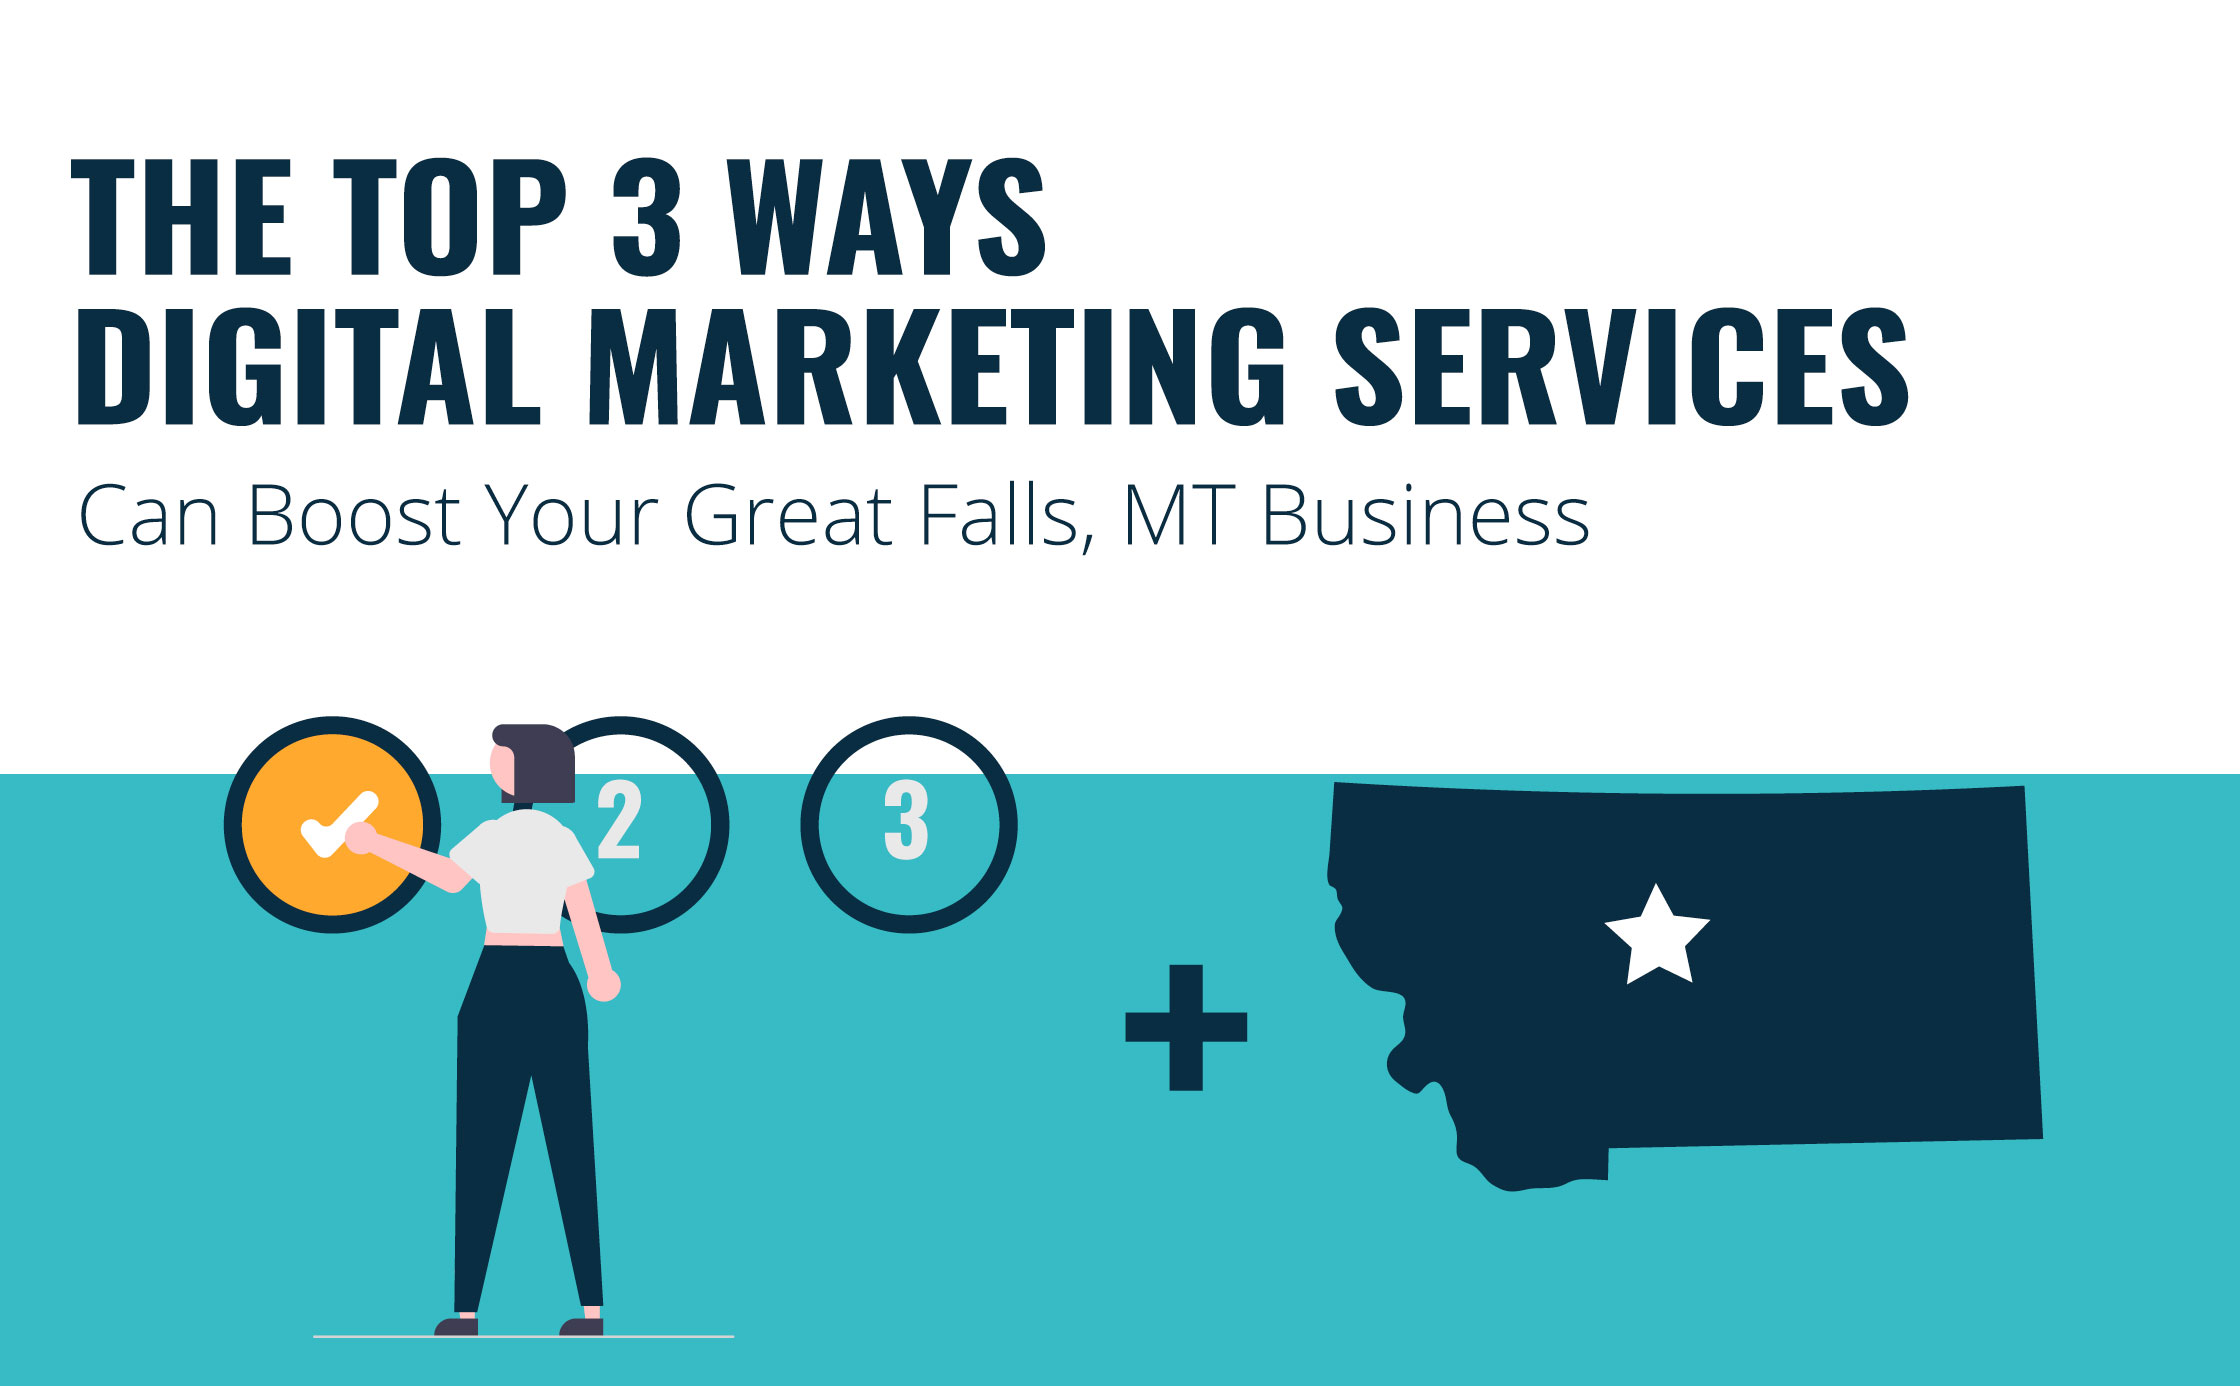 Top 3 Ways Digital Marketing Services Can Boost Your Great Falls, MT Business